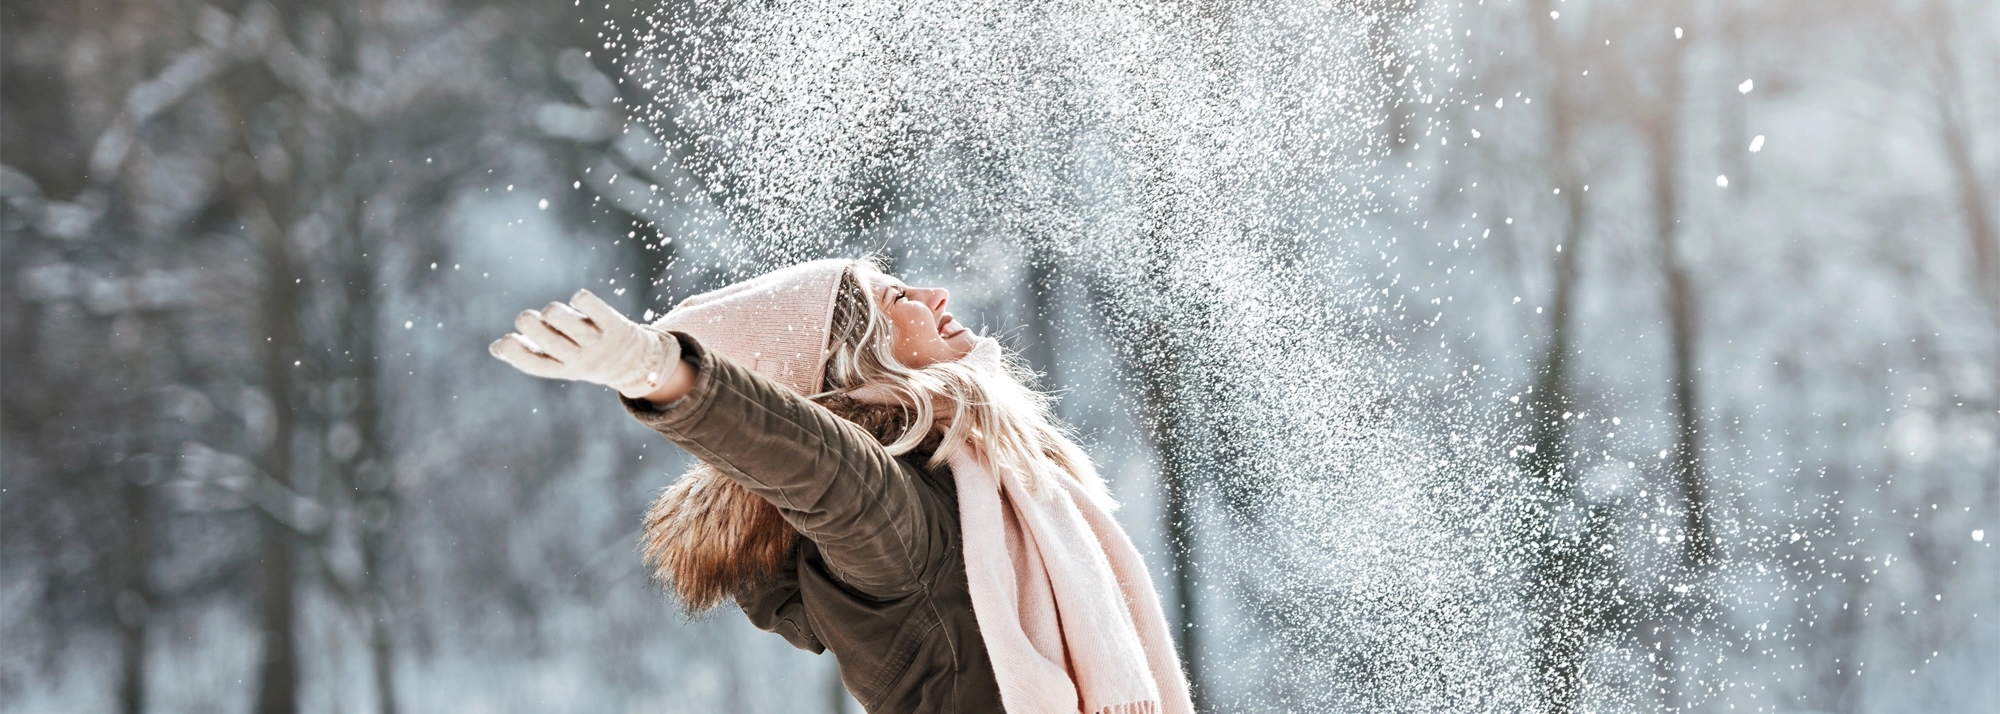 woman-playing in snow-2000x714.webp